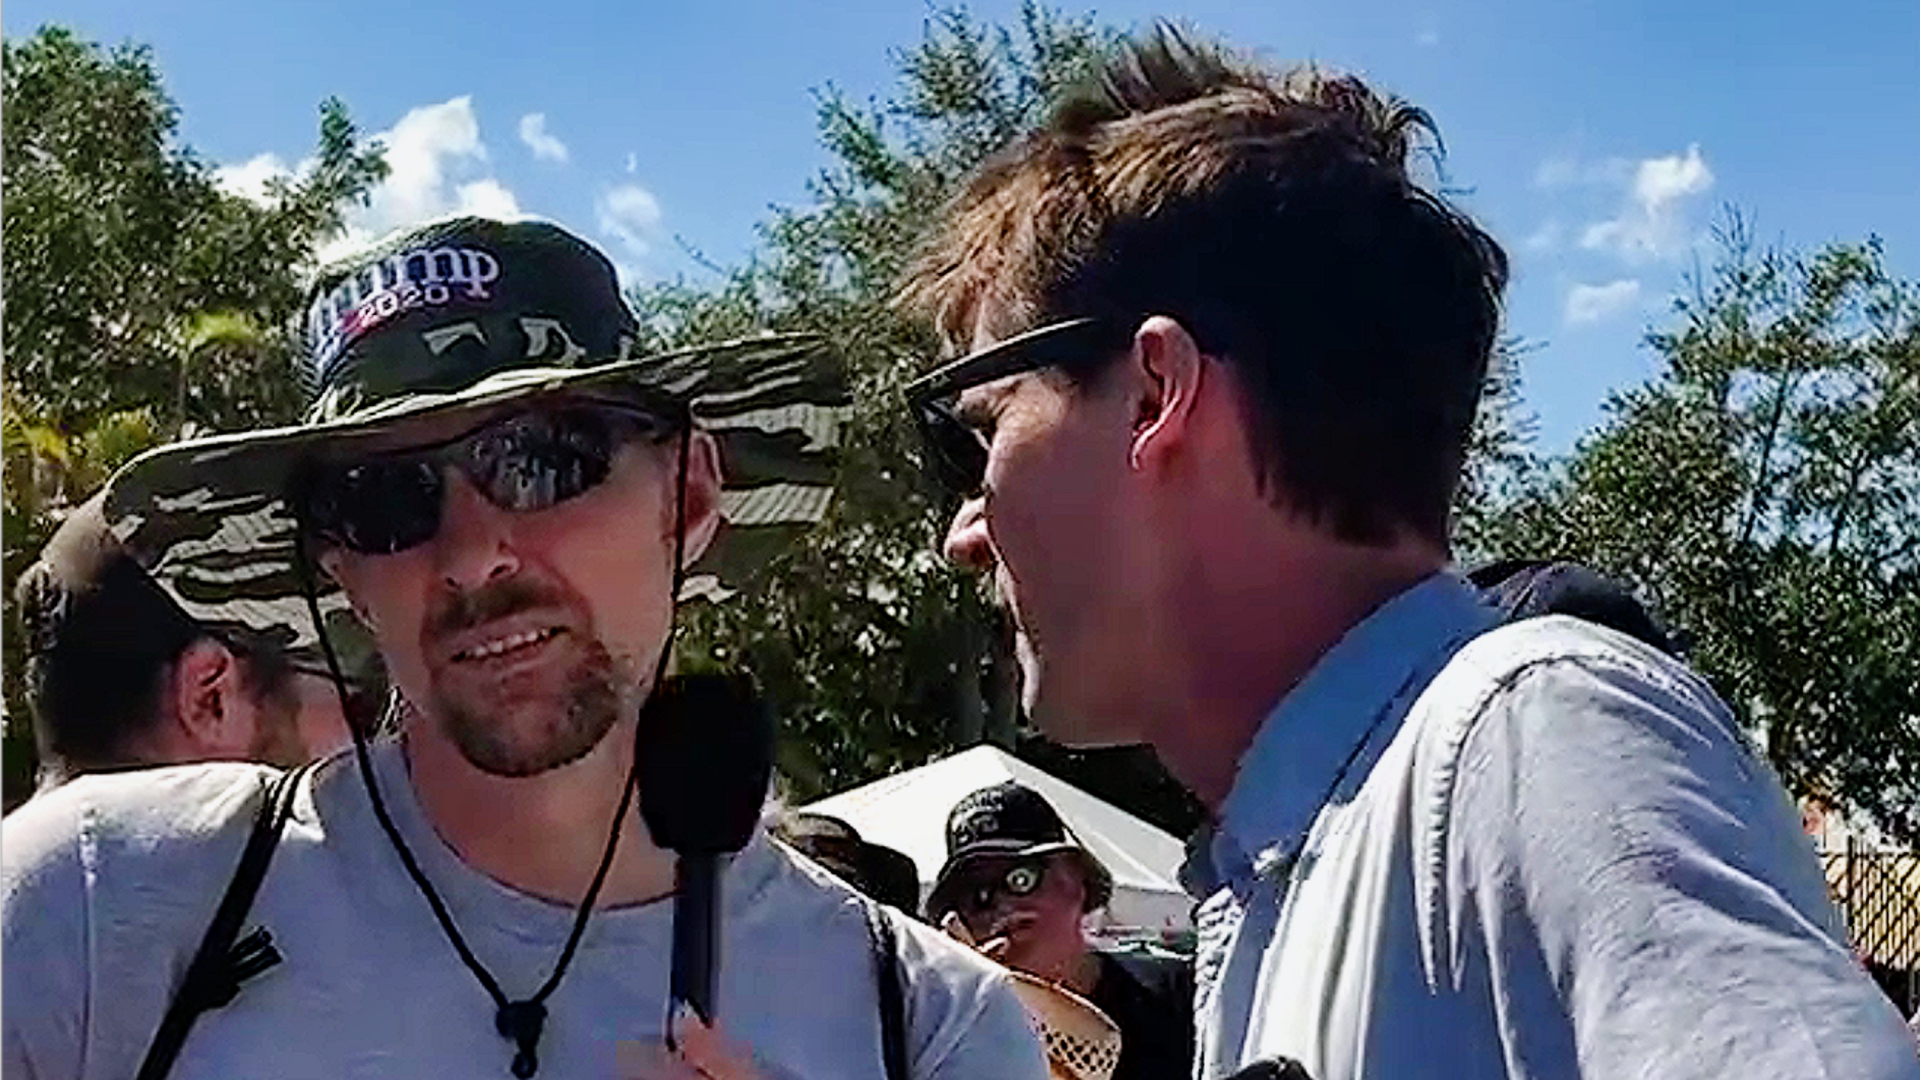 'We Never Went to the Moon!' Trump Fan At Rally Stuns Interviewer — And 1,000 Percent Could Be Nic Cage In Disguise